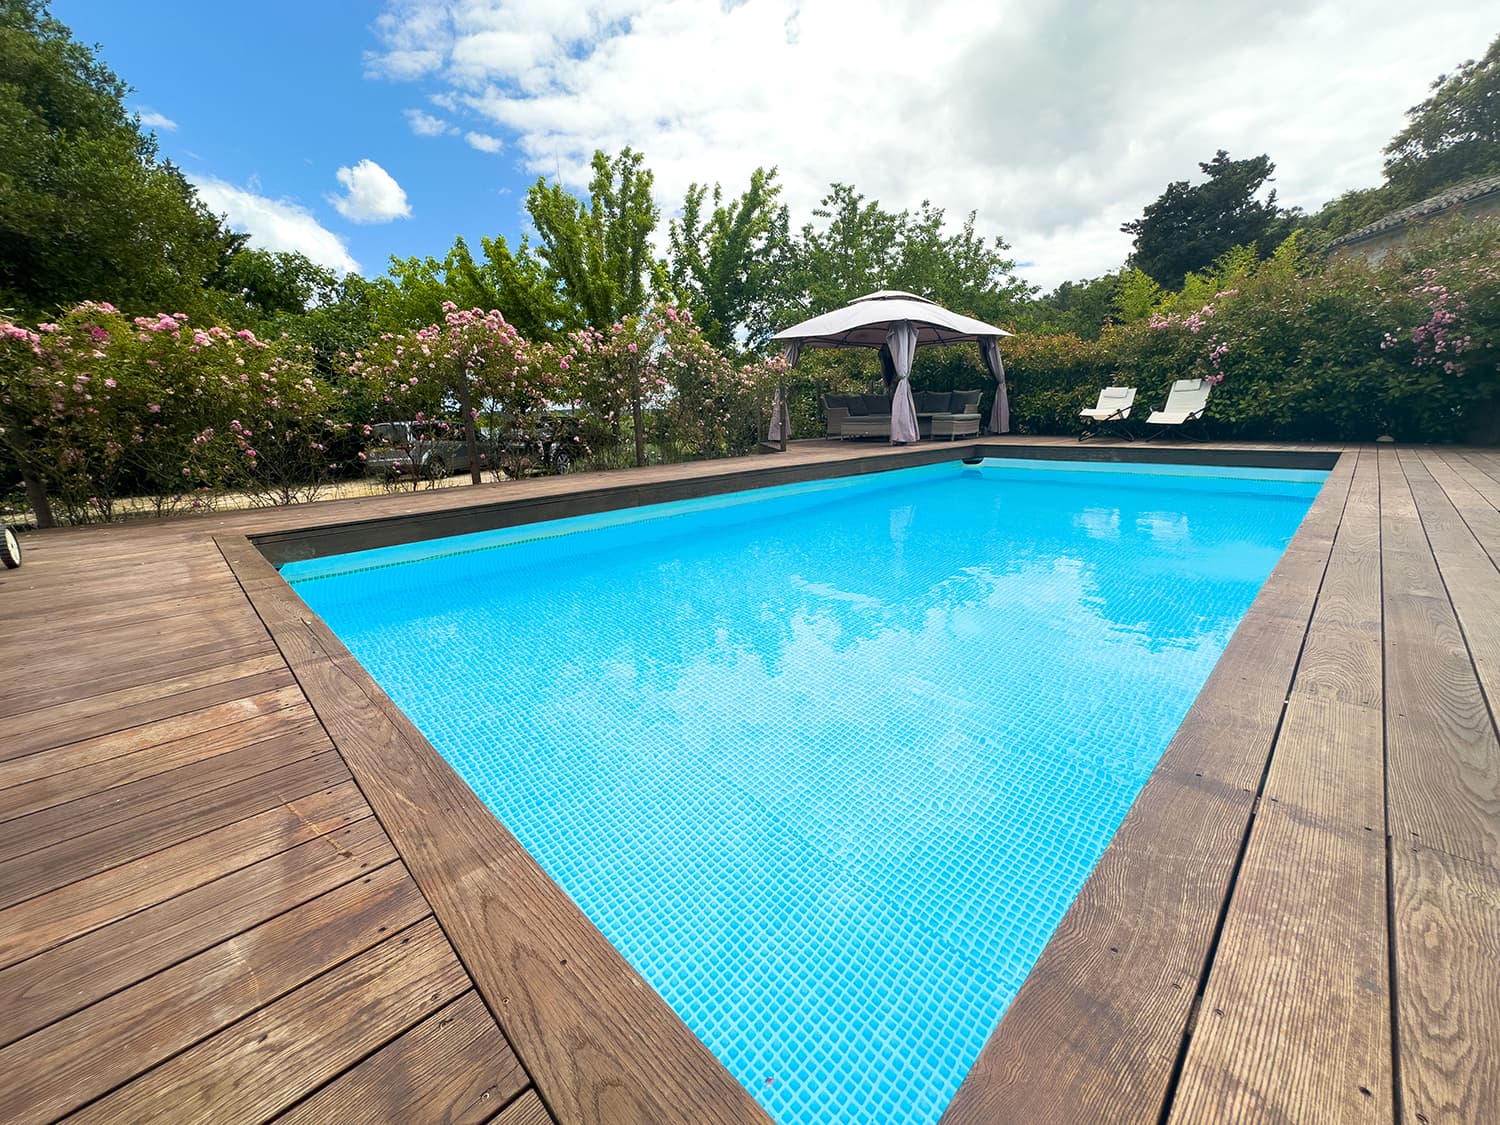 Private pool in Gard, South of France